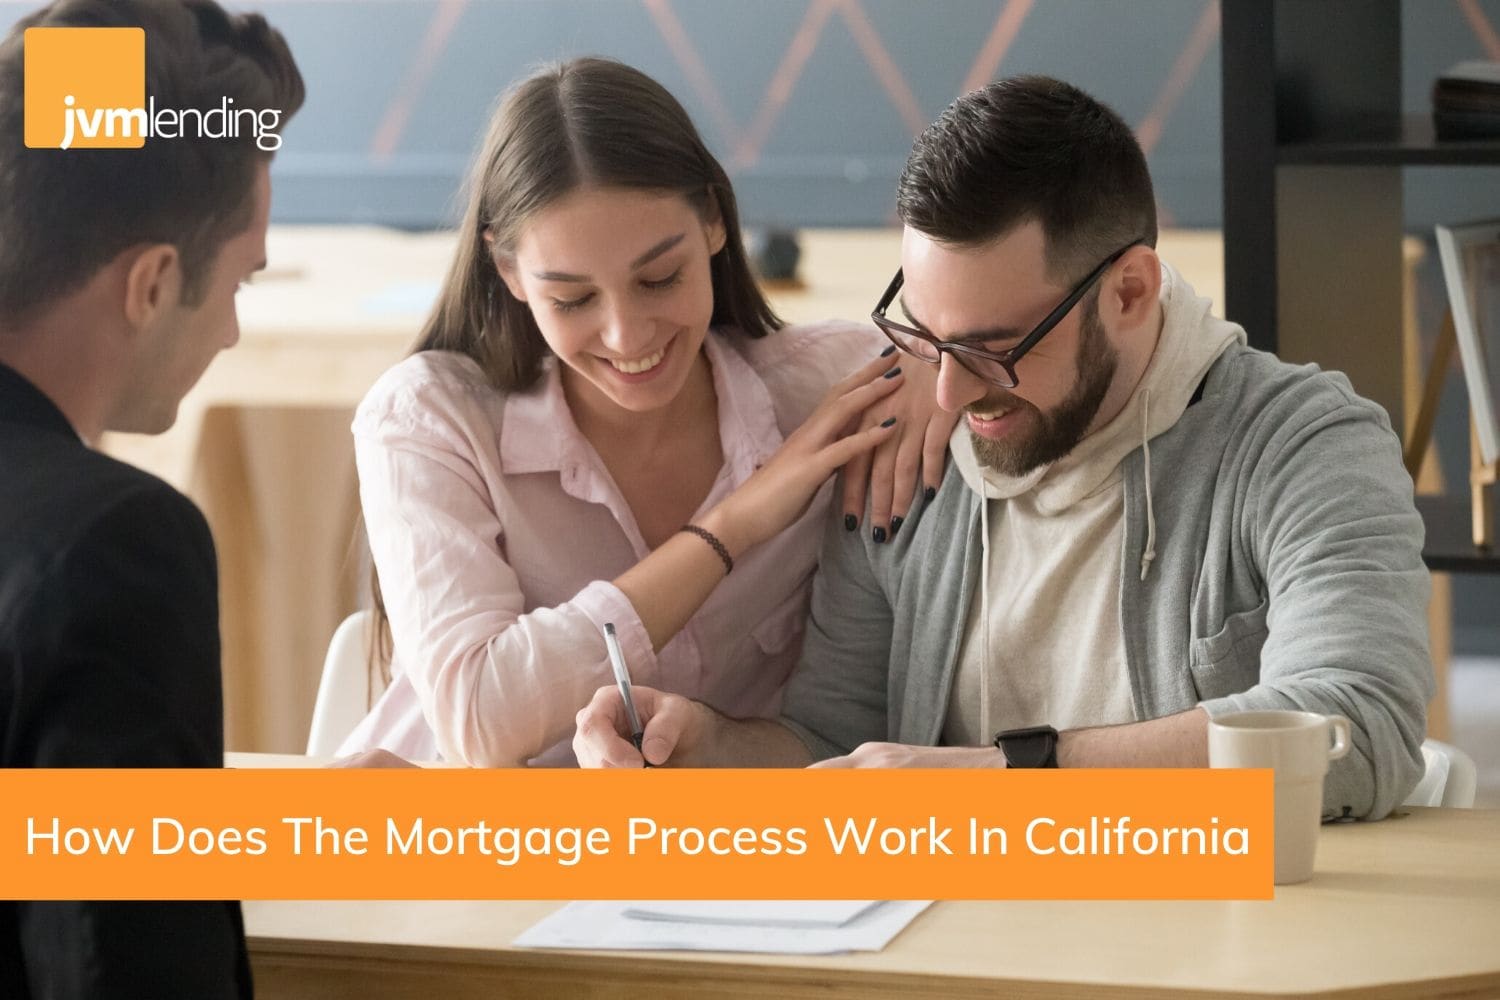 Homebuyers working with their mortgage lender throughout the mortgage process in California. The closing process is where buyers sign their documents in the mortgage process.